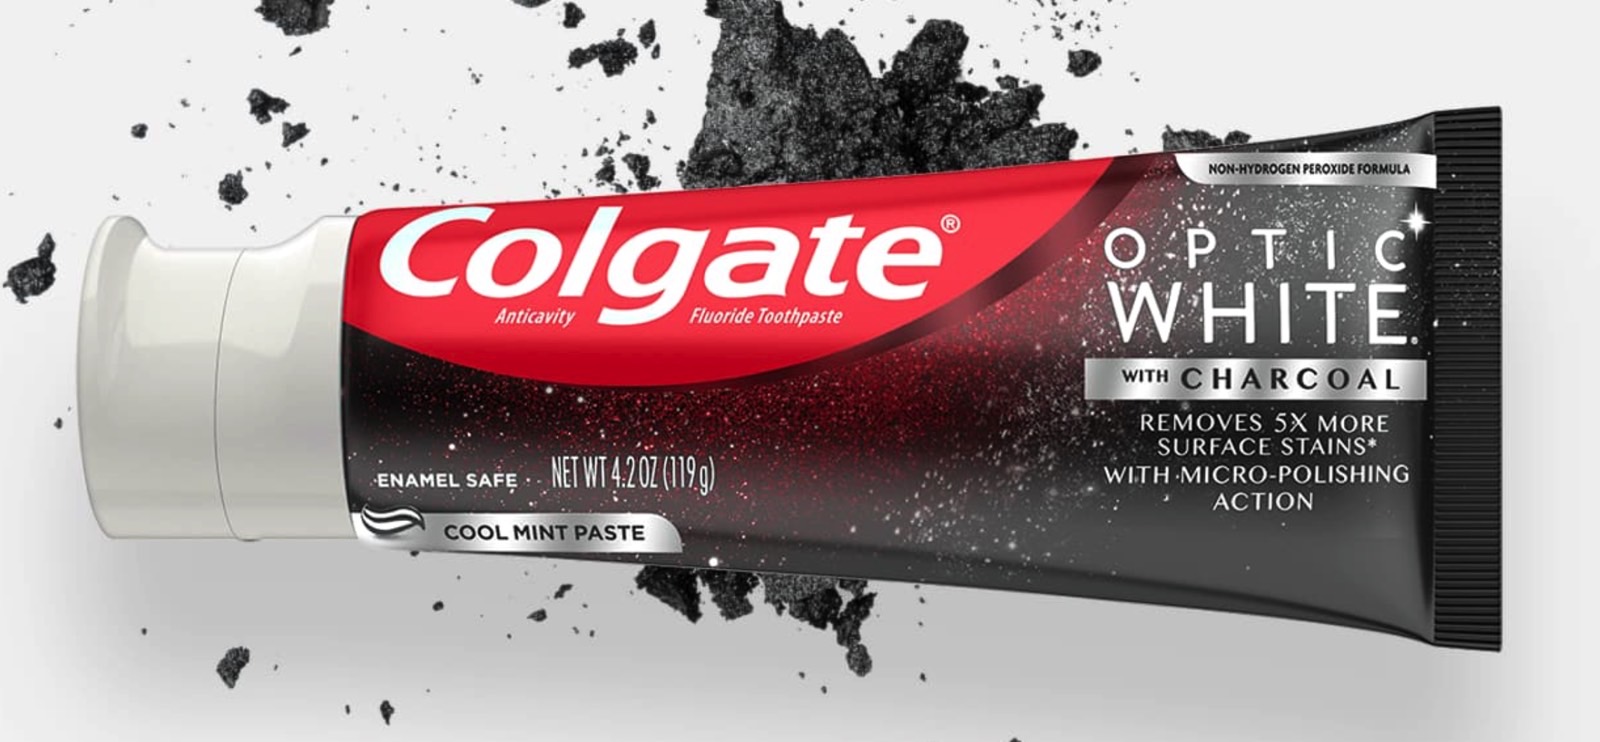 Colgate Optic White Charcoal toothpaste.